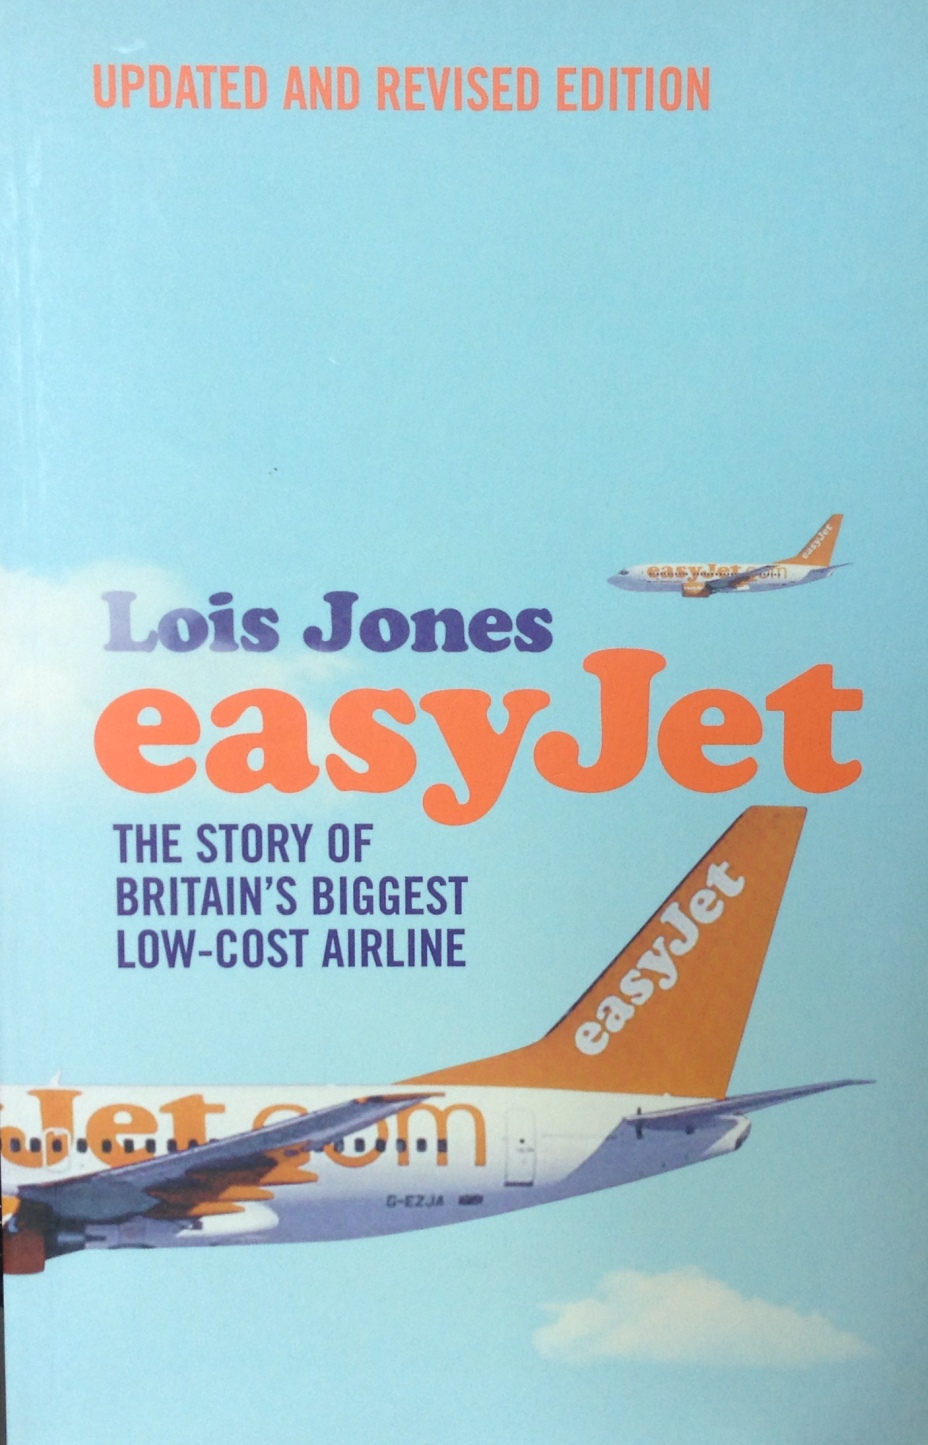 Kitap Notları: easyJet – The Story of Britain’s Biggest Low-Cost Airline